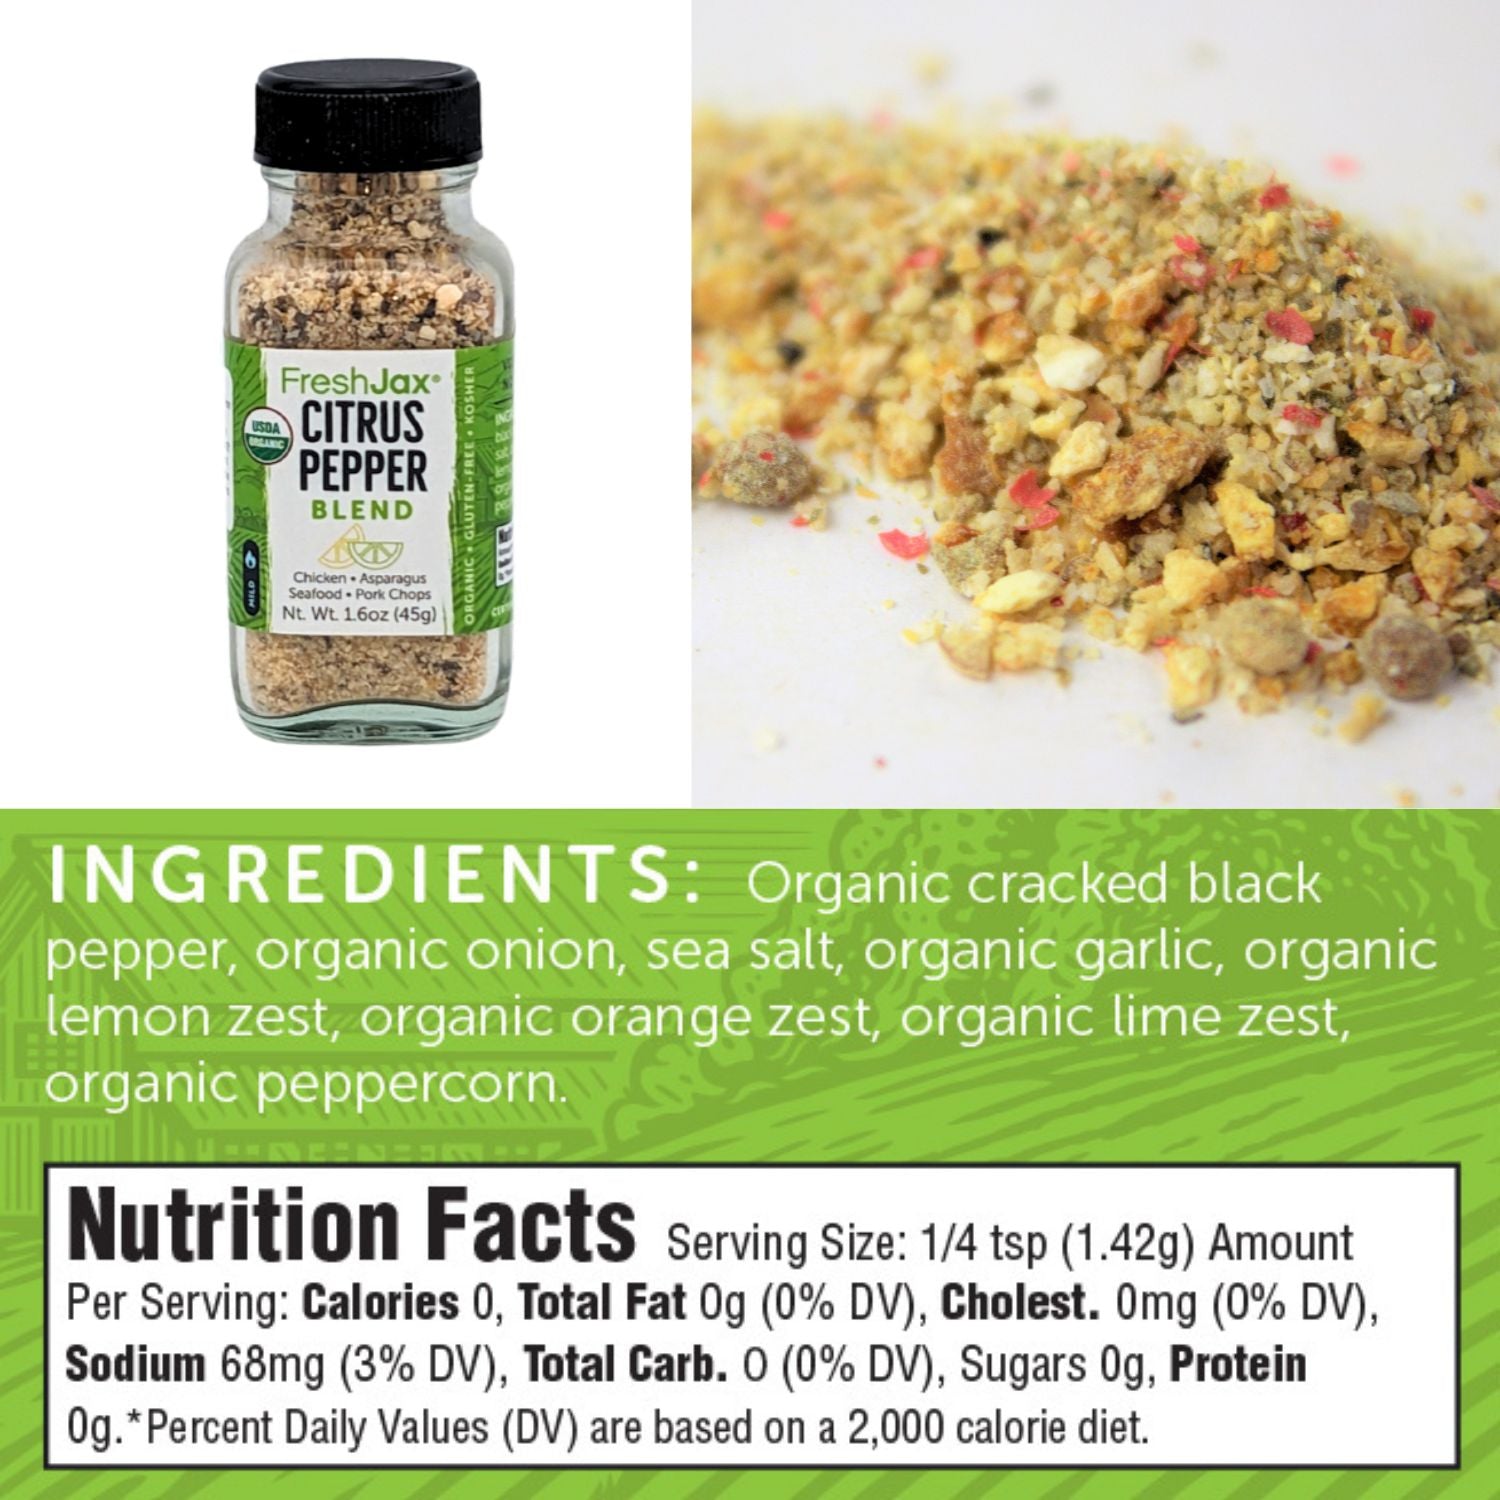 FreshJax Organic Spices Citrus Pepper Blend Ingredients and Nutrition Facts